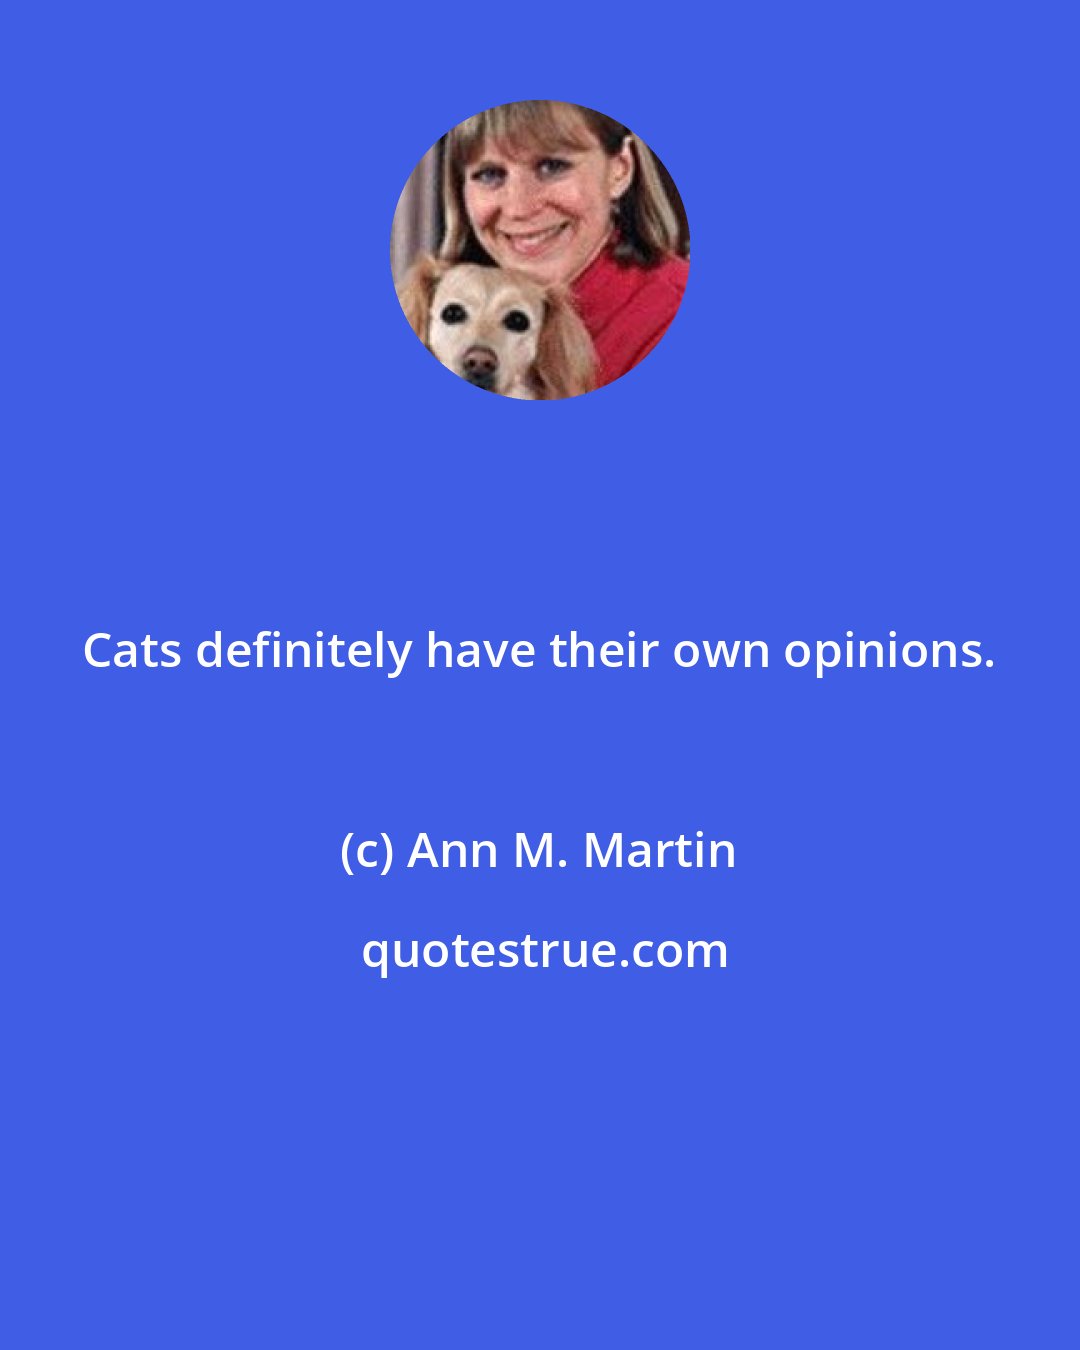 Ann M. Martin: Cats definitely have their own opinions.